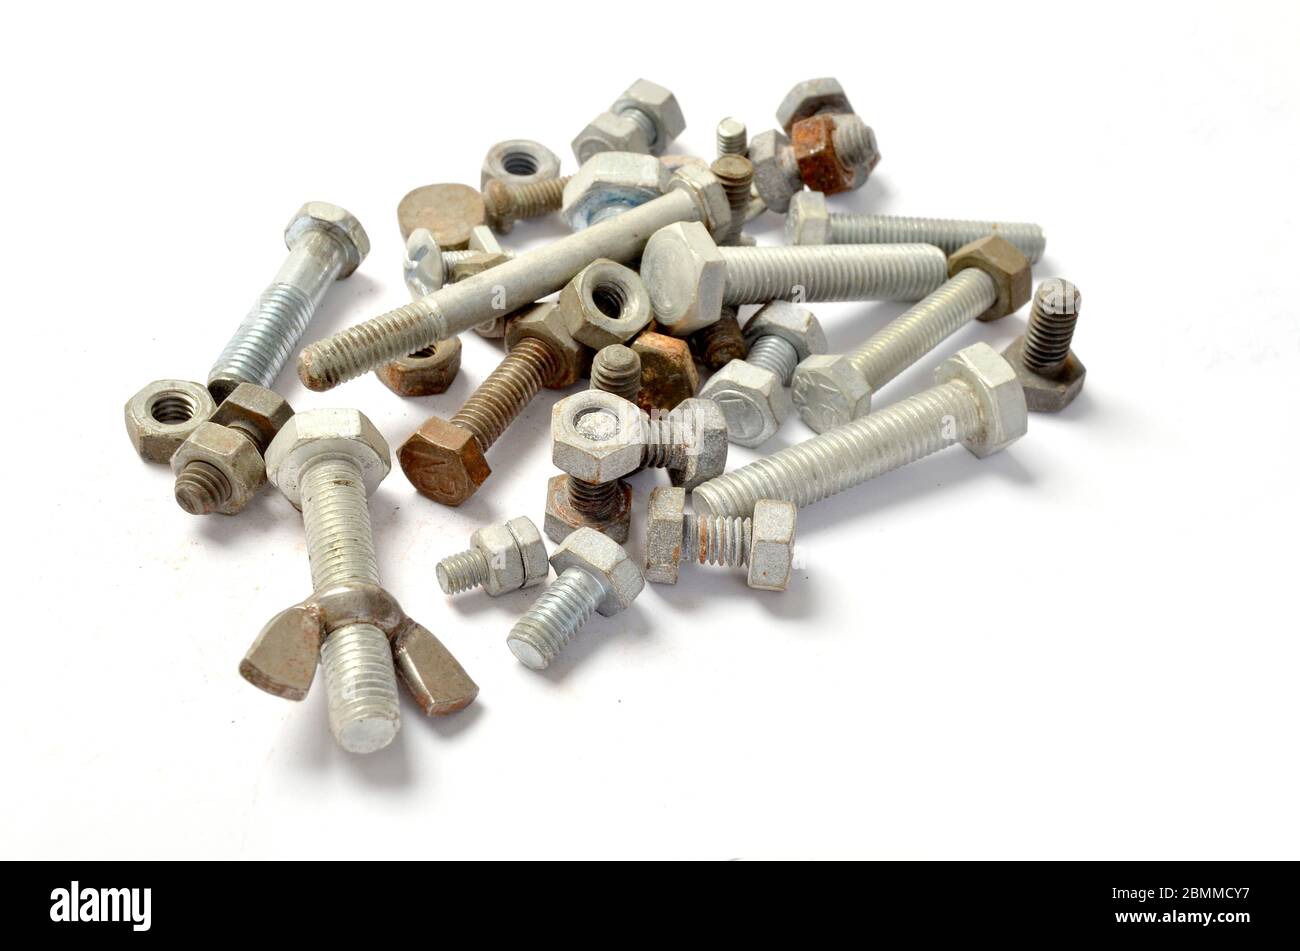 Pile of loose nuts & bolts on white. Stock Photo